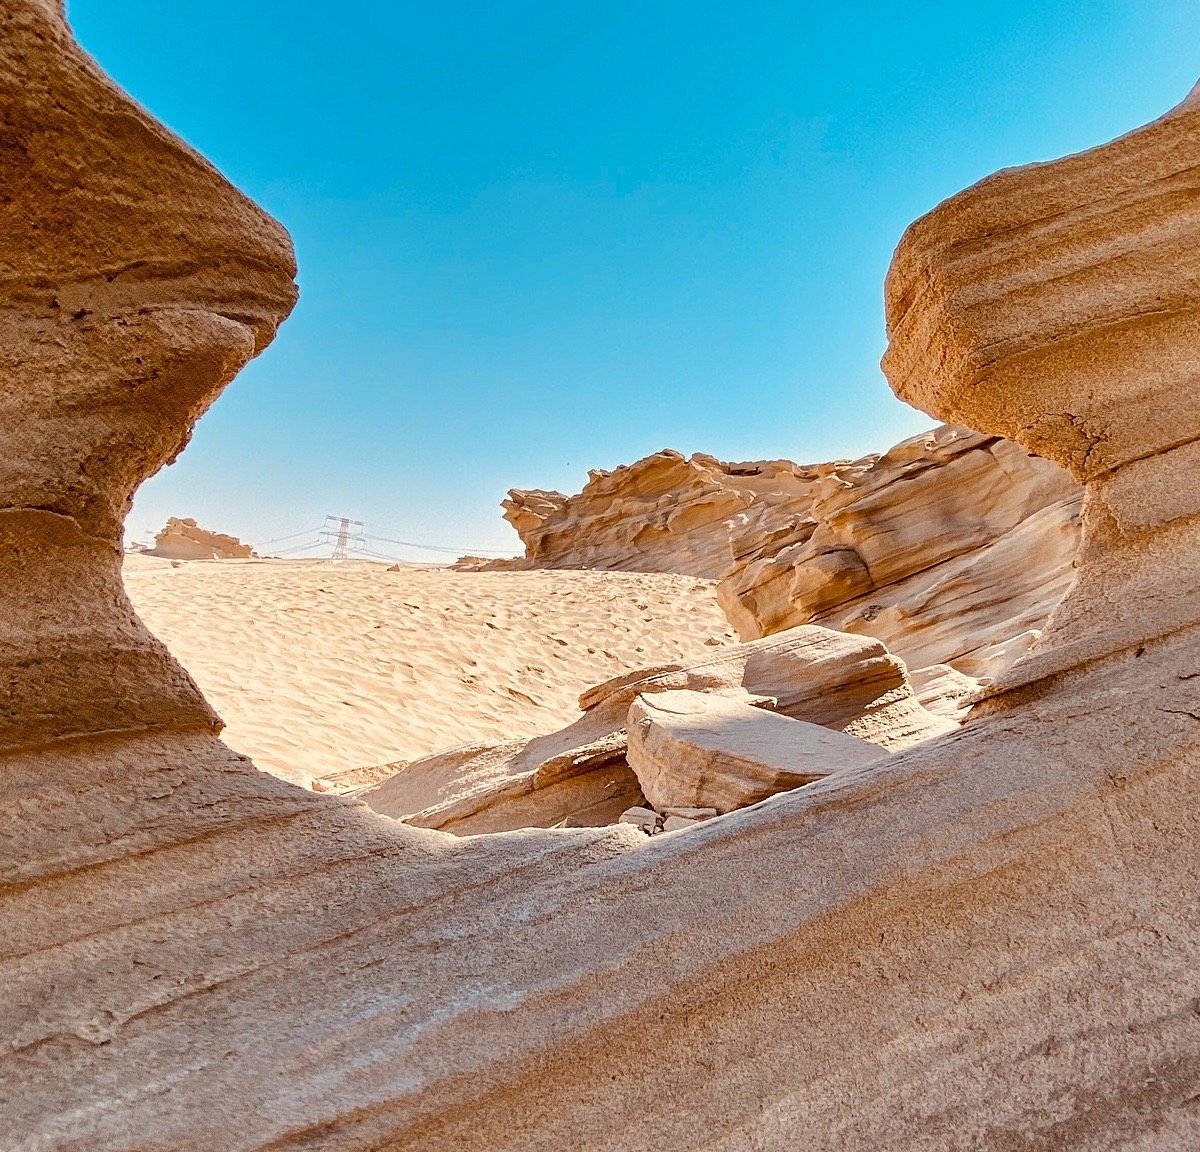 Alwathba Fossil Dunes Abu Dhabi All You Need To Know Before You Go